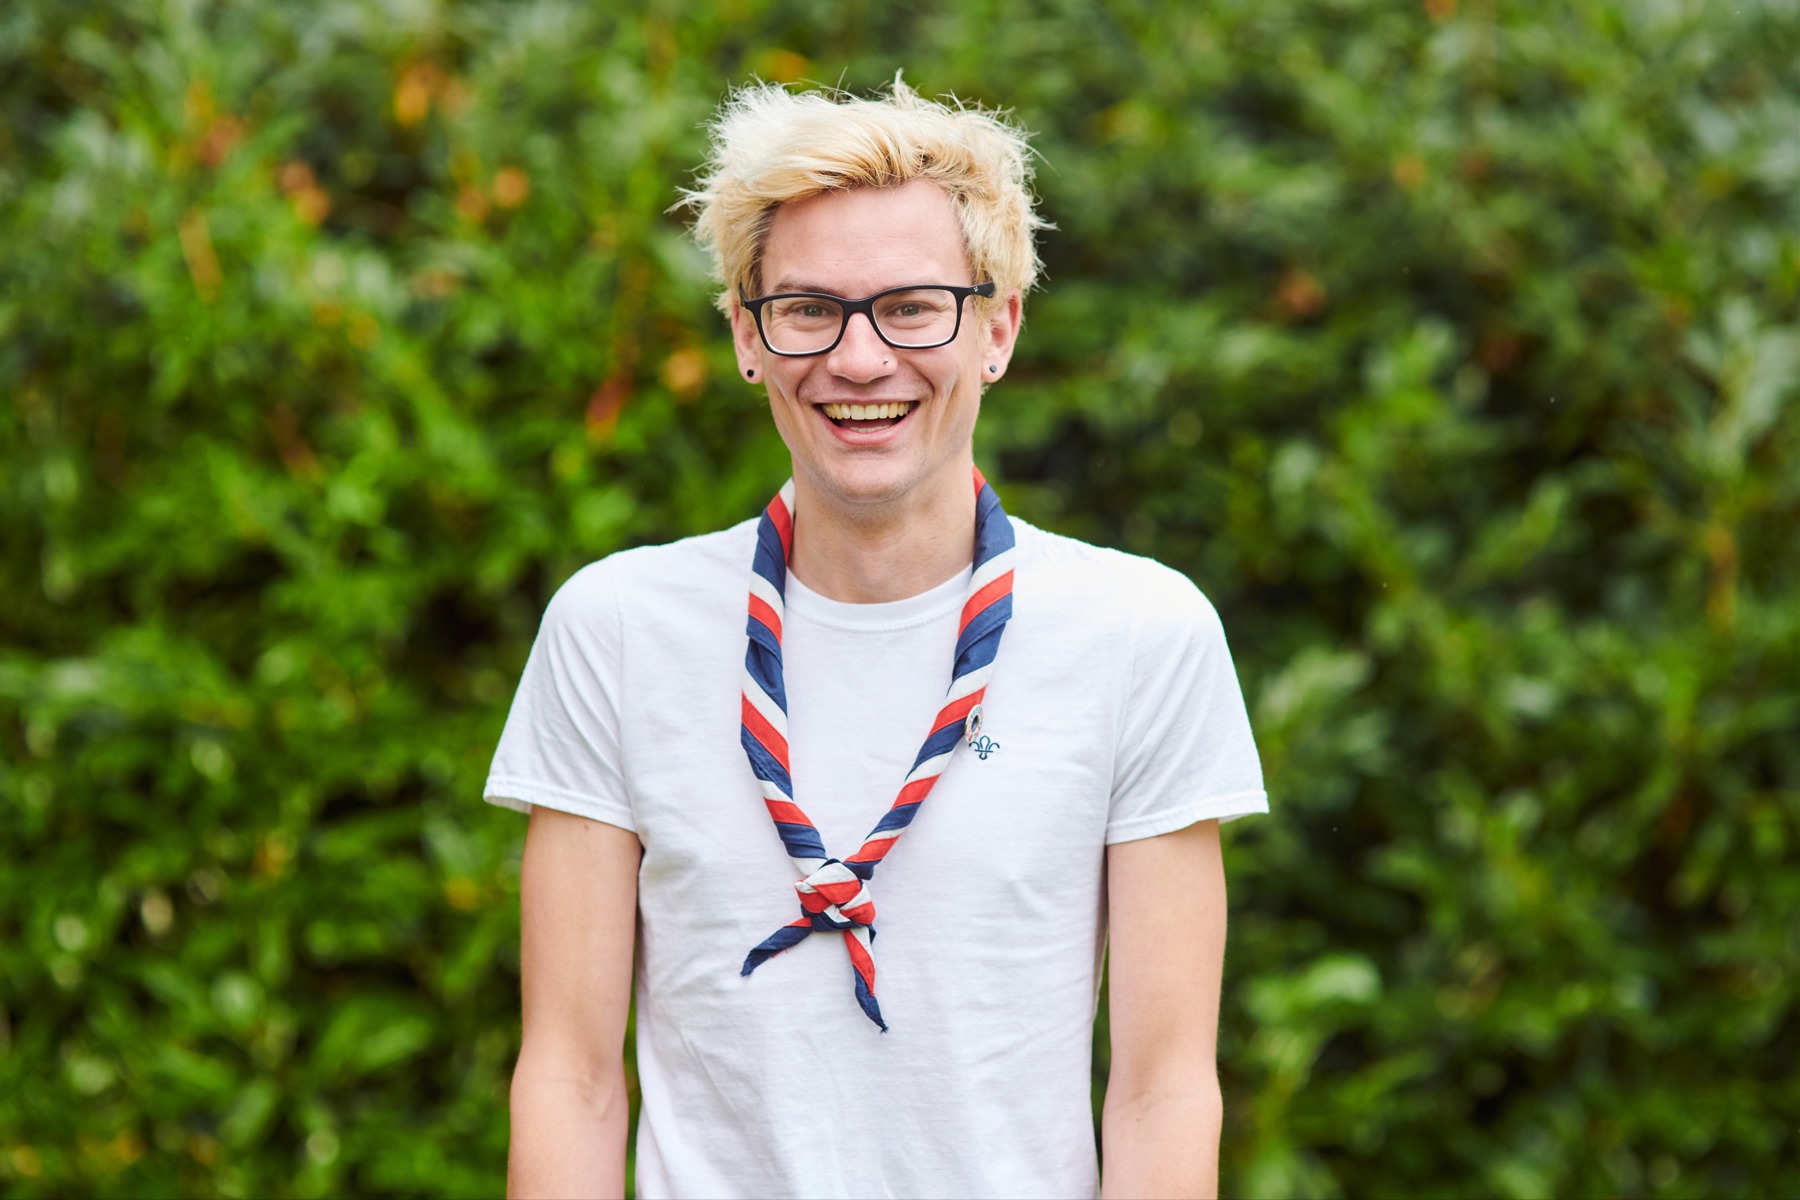 A Scouts volunteer outside wearing a white t-shirt and necker, smiling in front of bushes